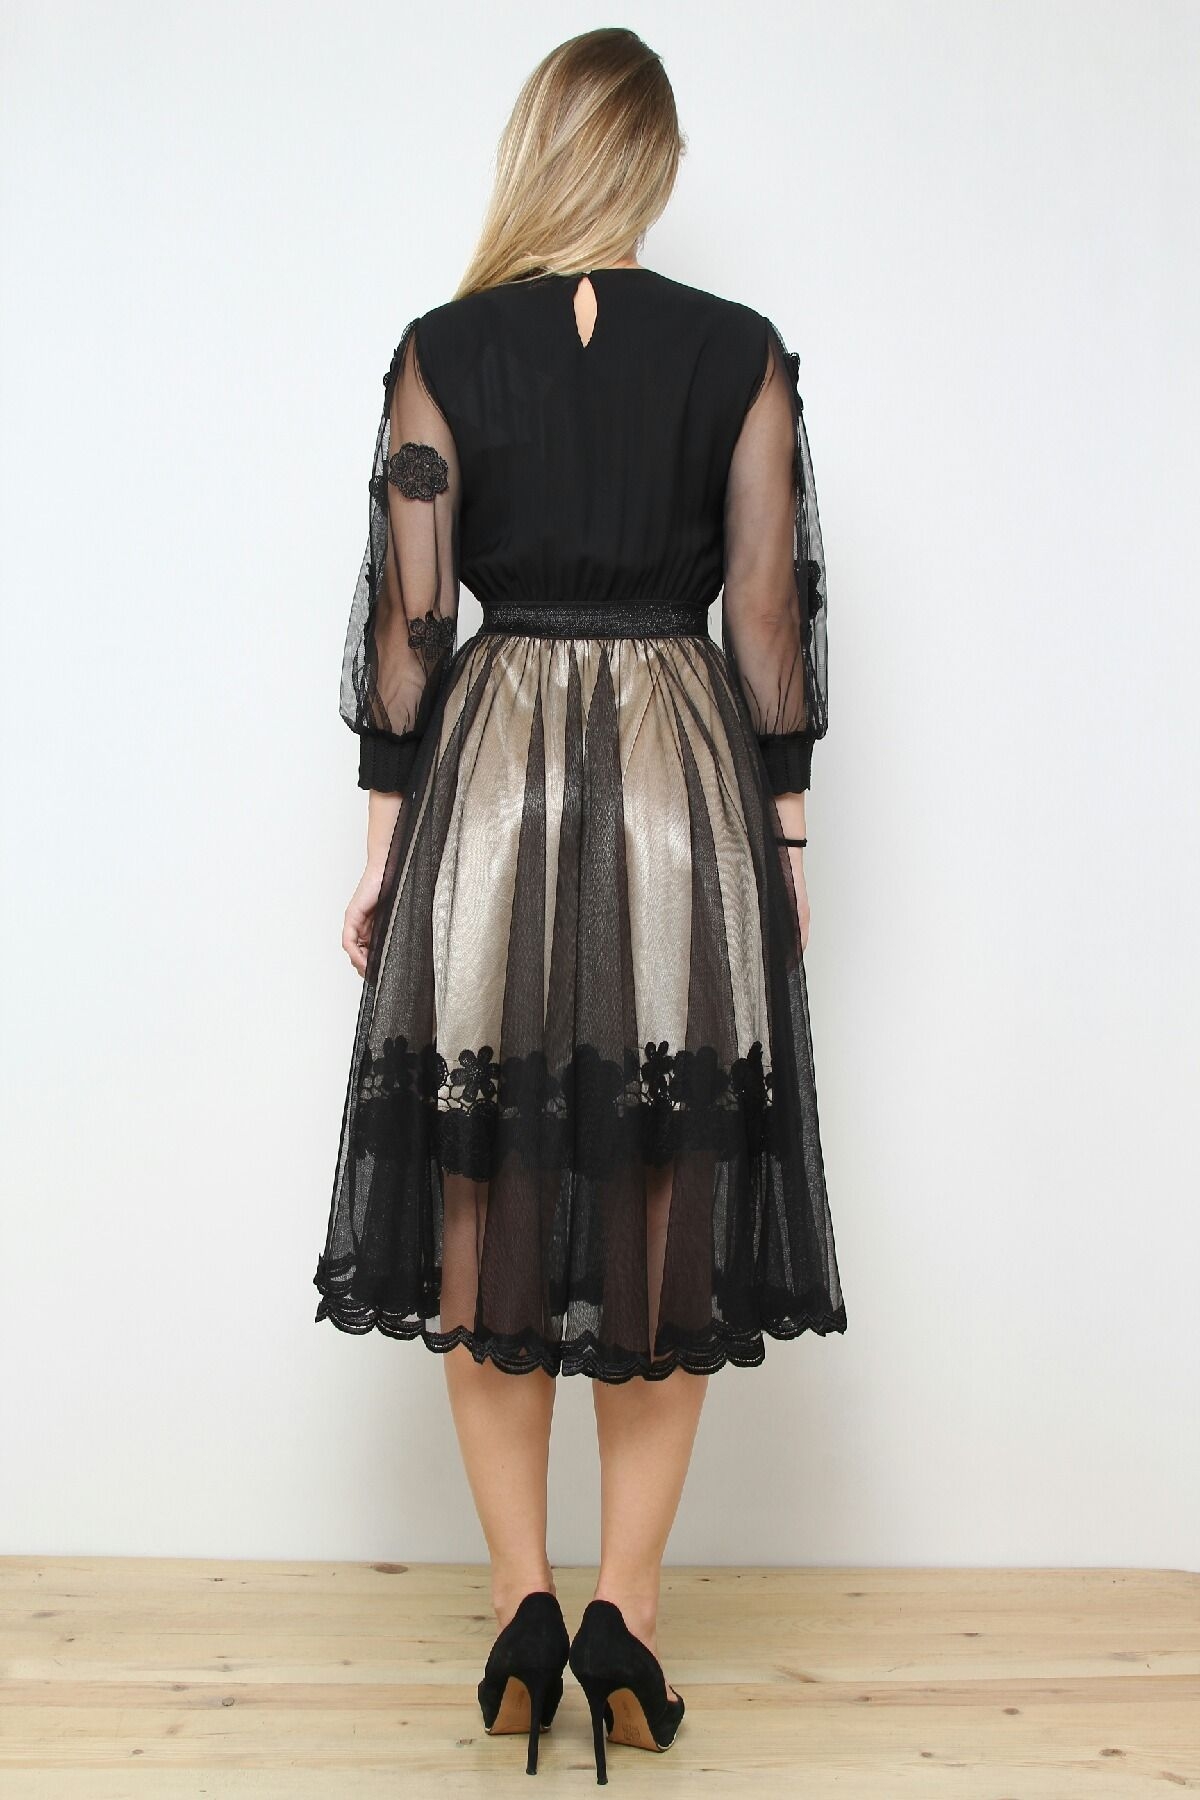 Evening dress with the sparkling top and chiffon skirt